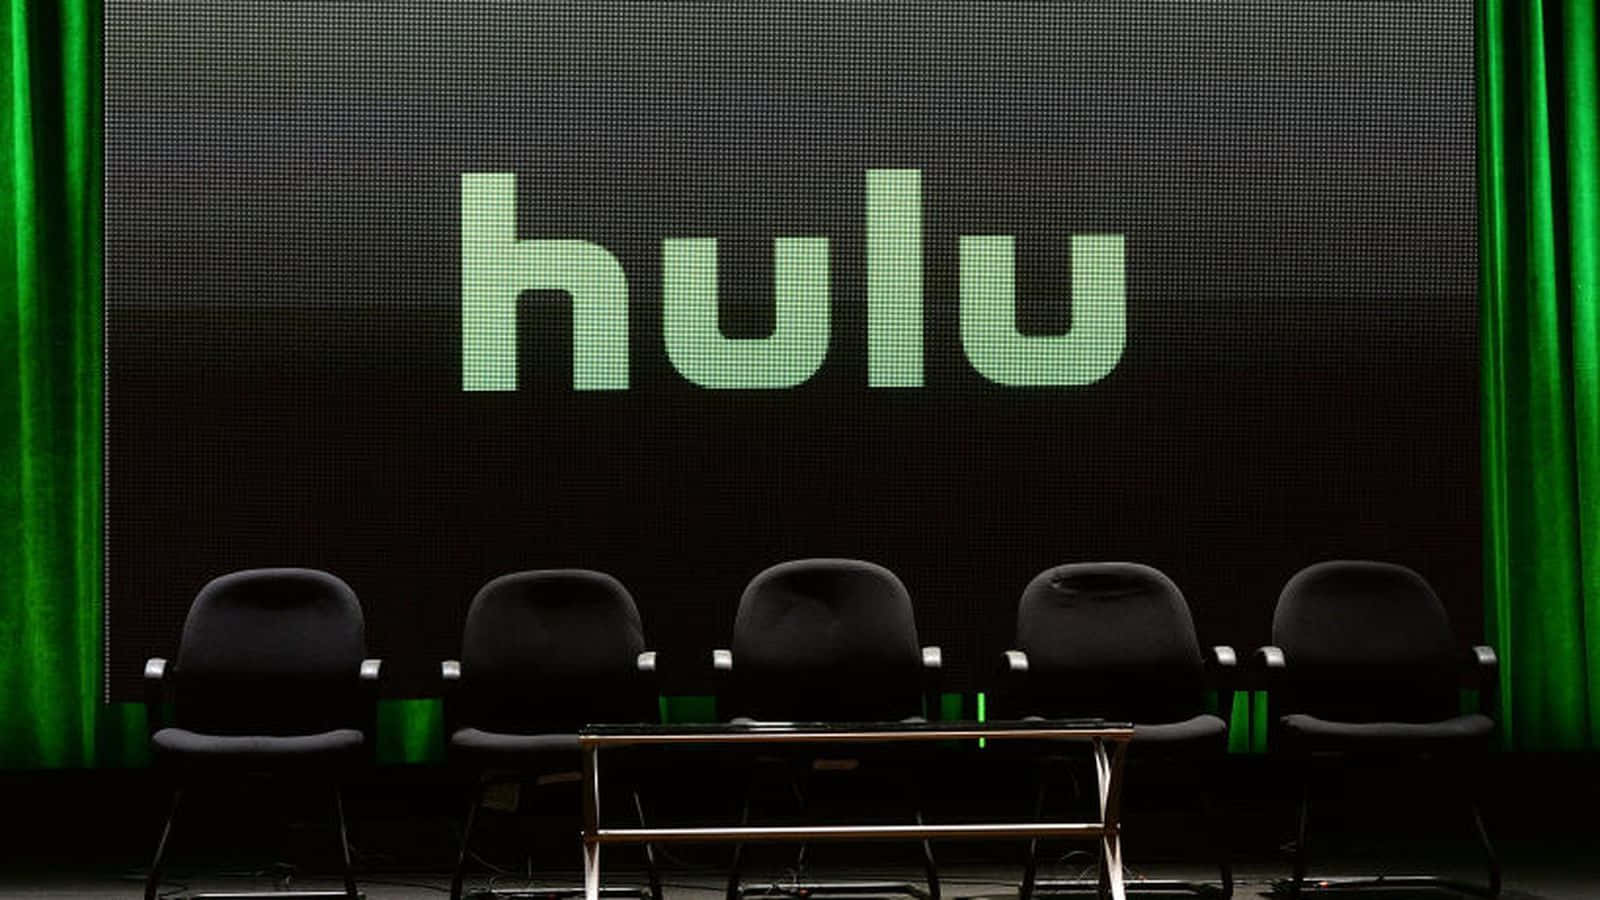 Upgrade your entertainment experience with Hulu